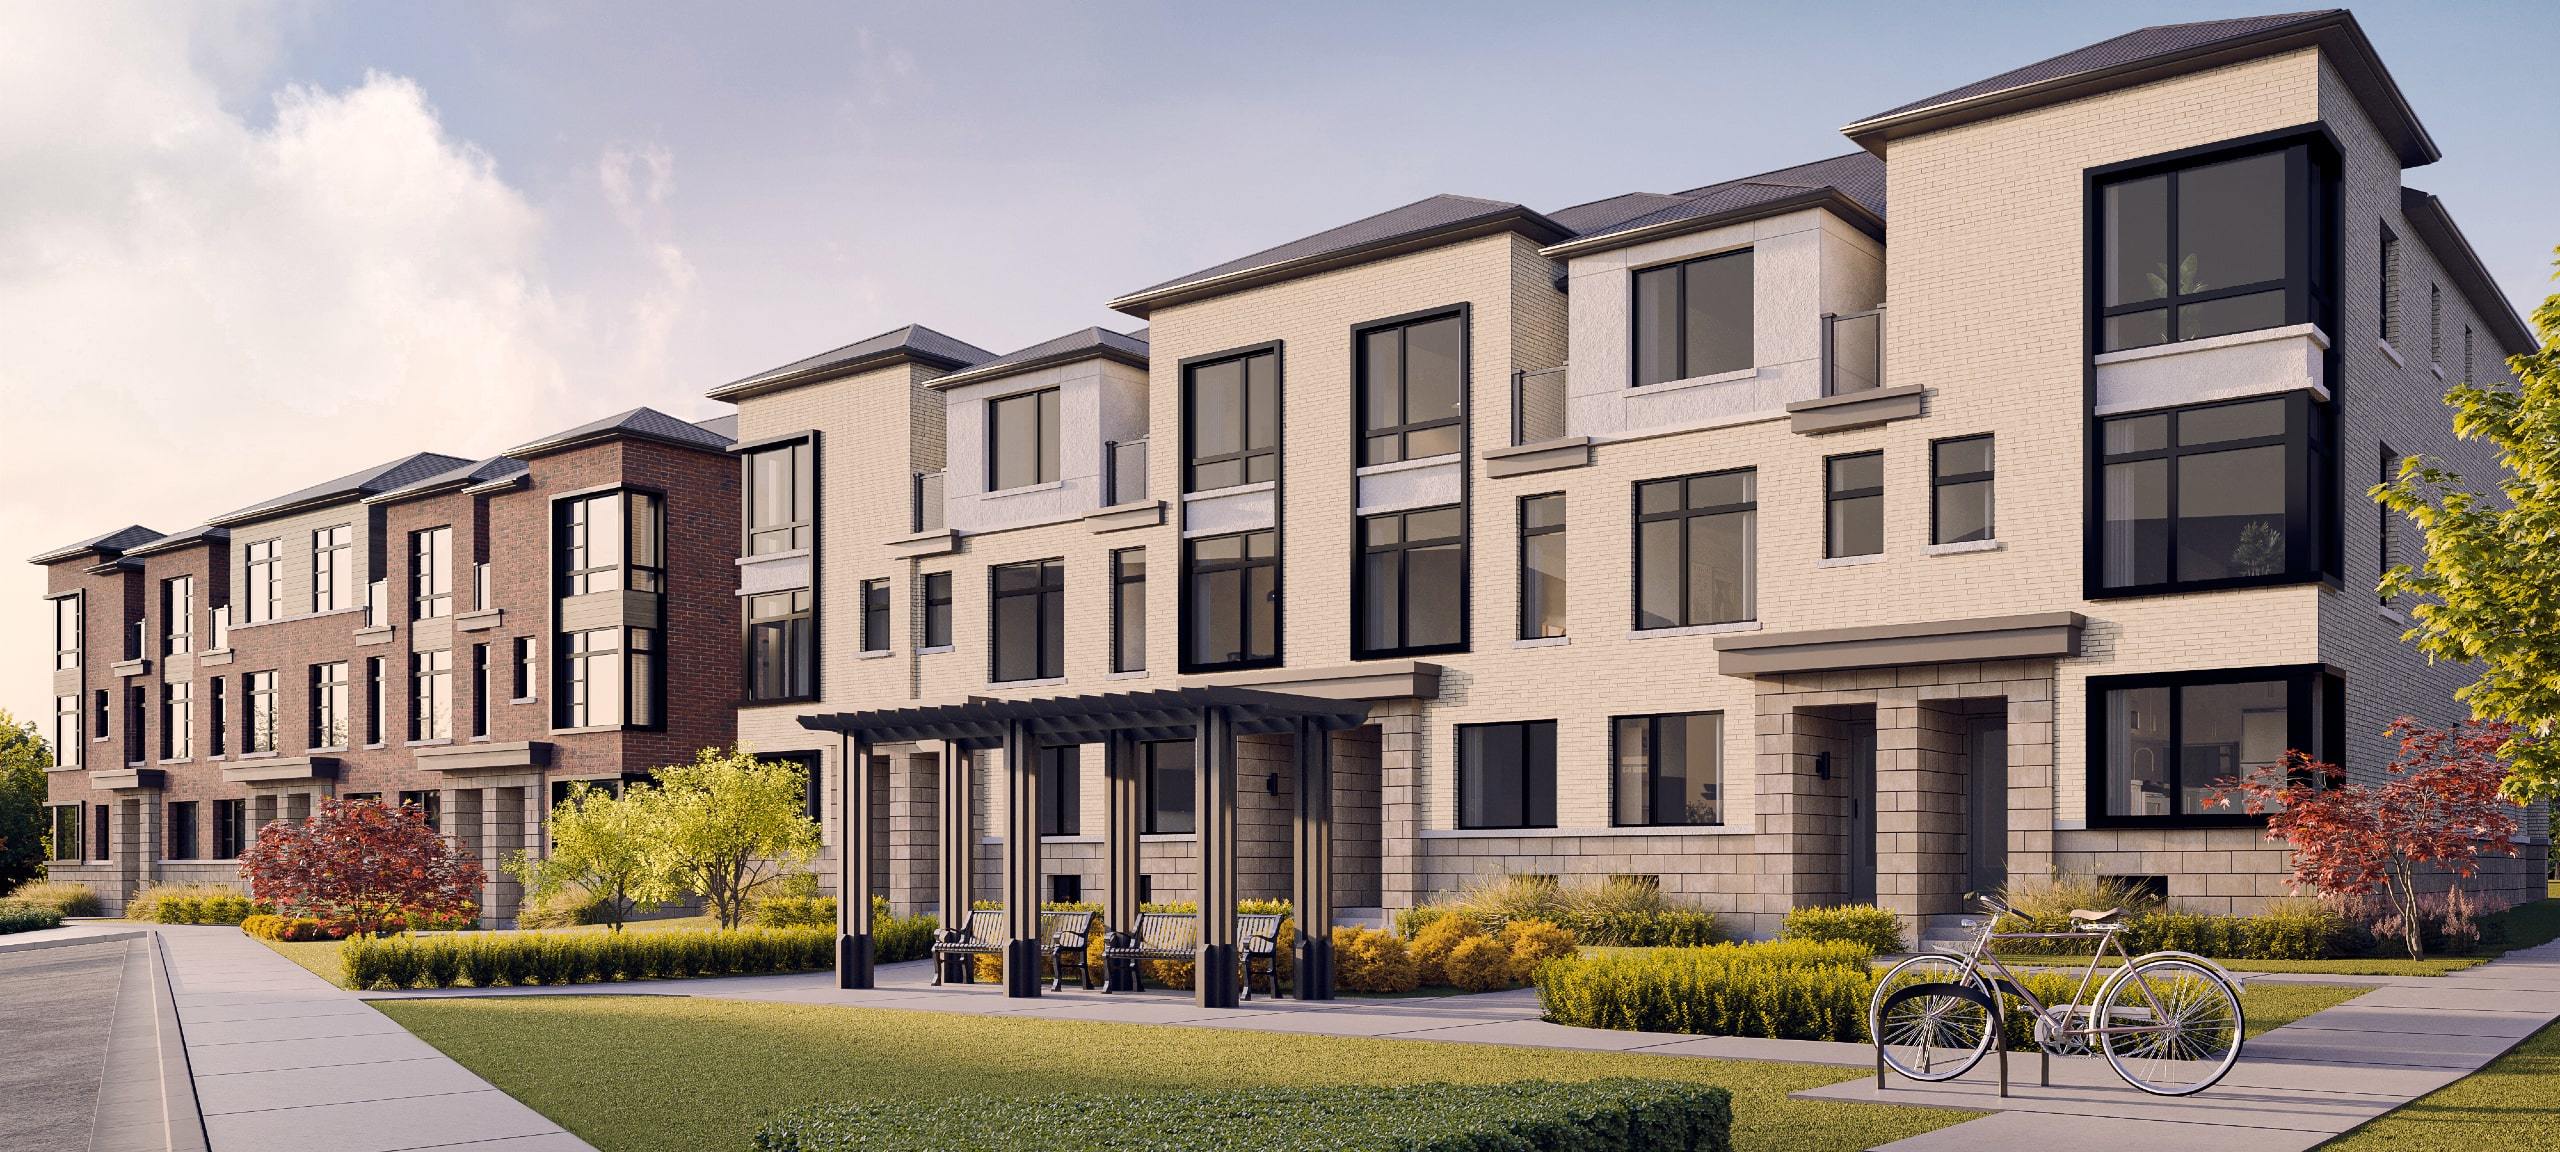 Rendering of Brooklin City Towns, a new townhome development by Madison Group